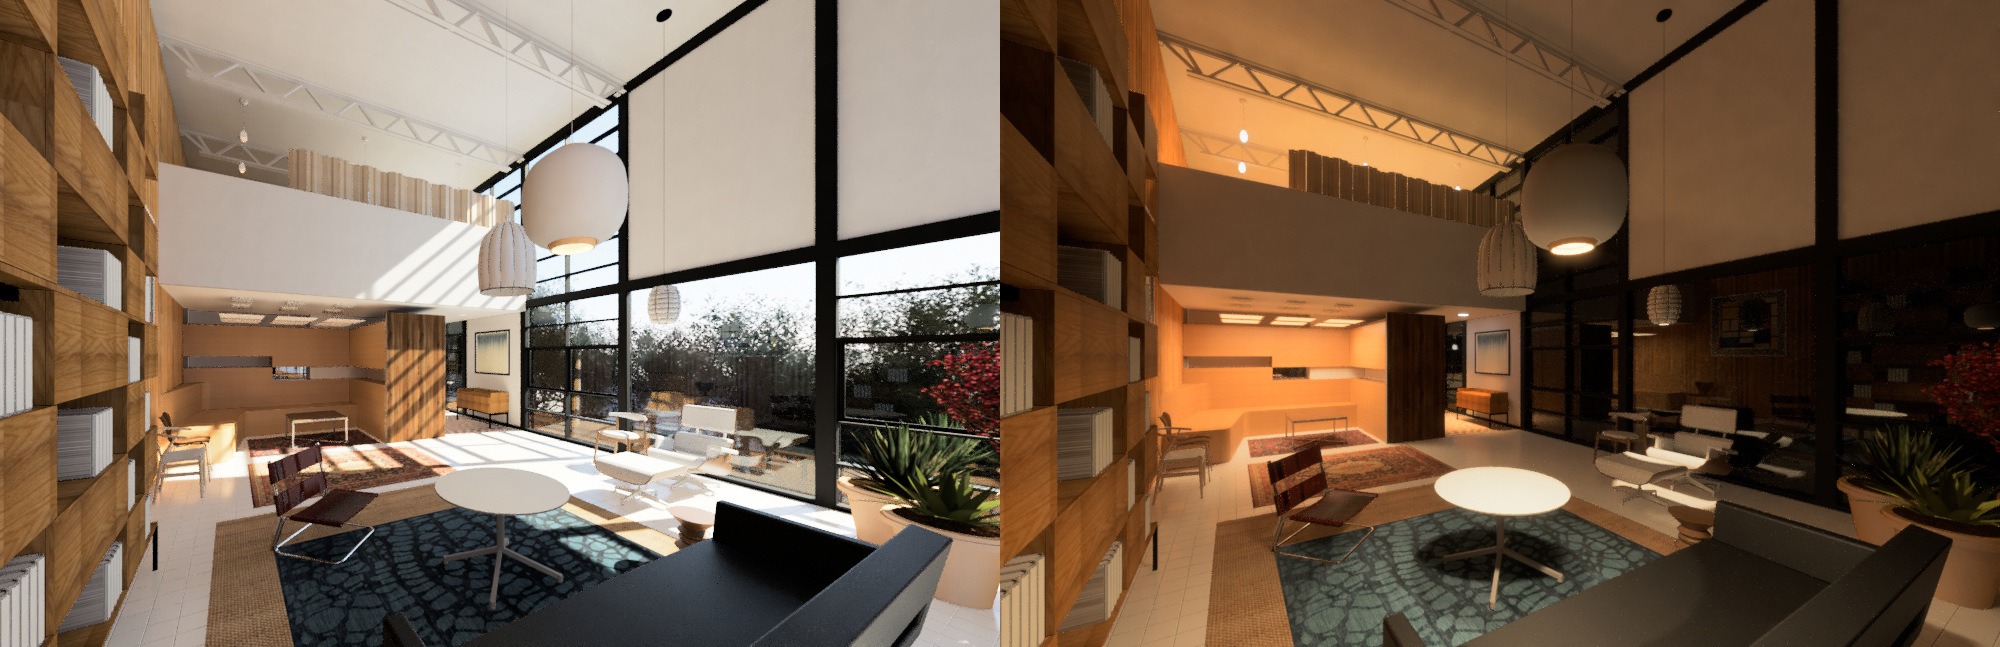 This image shows the session highlight presenting the Revit cloud final render views of the Eames house living area daytime and night time. This is the expected result at the end of this lecture.